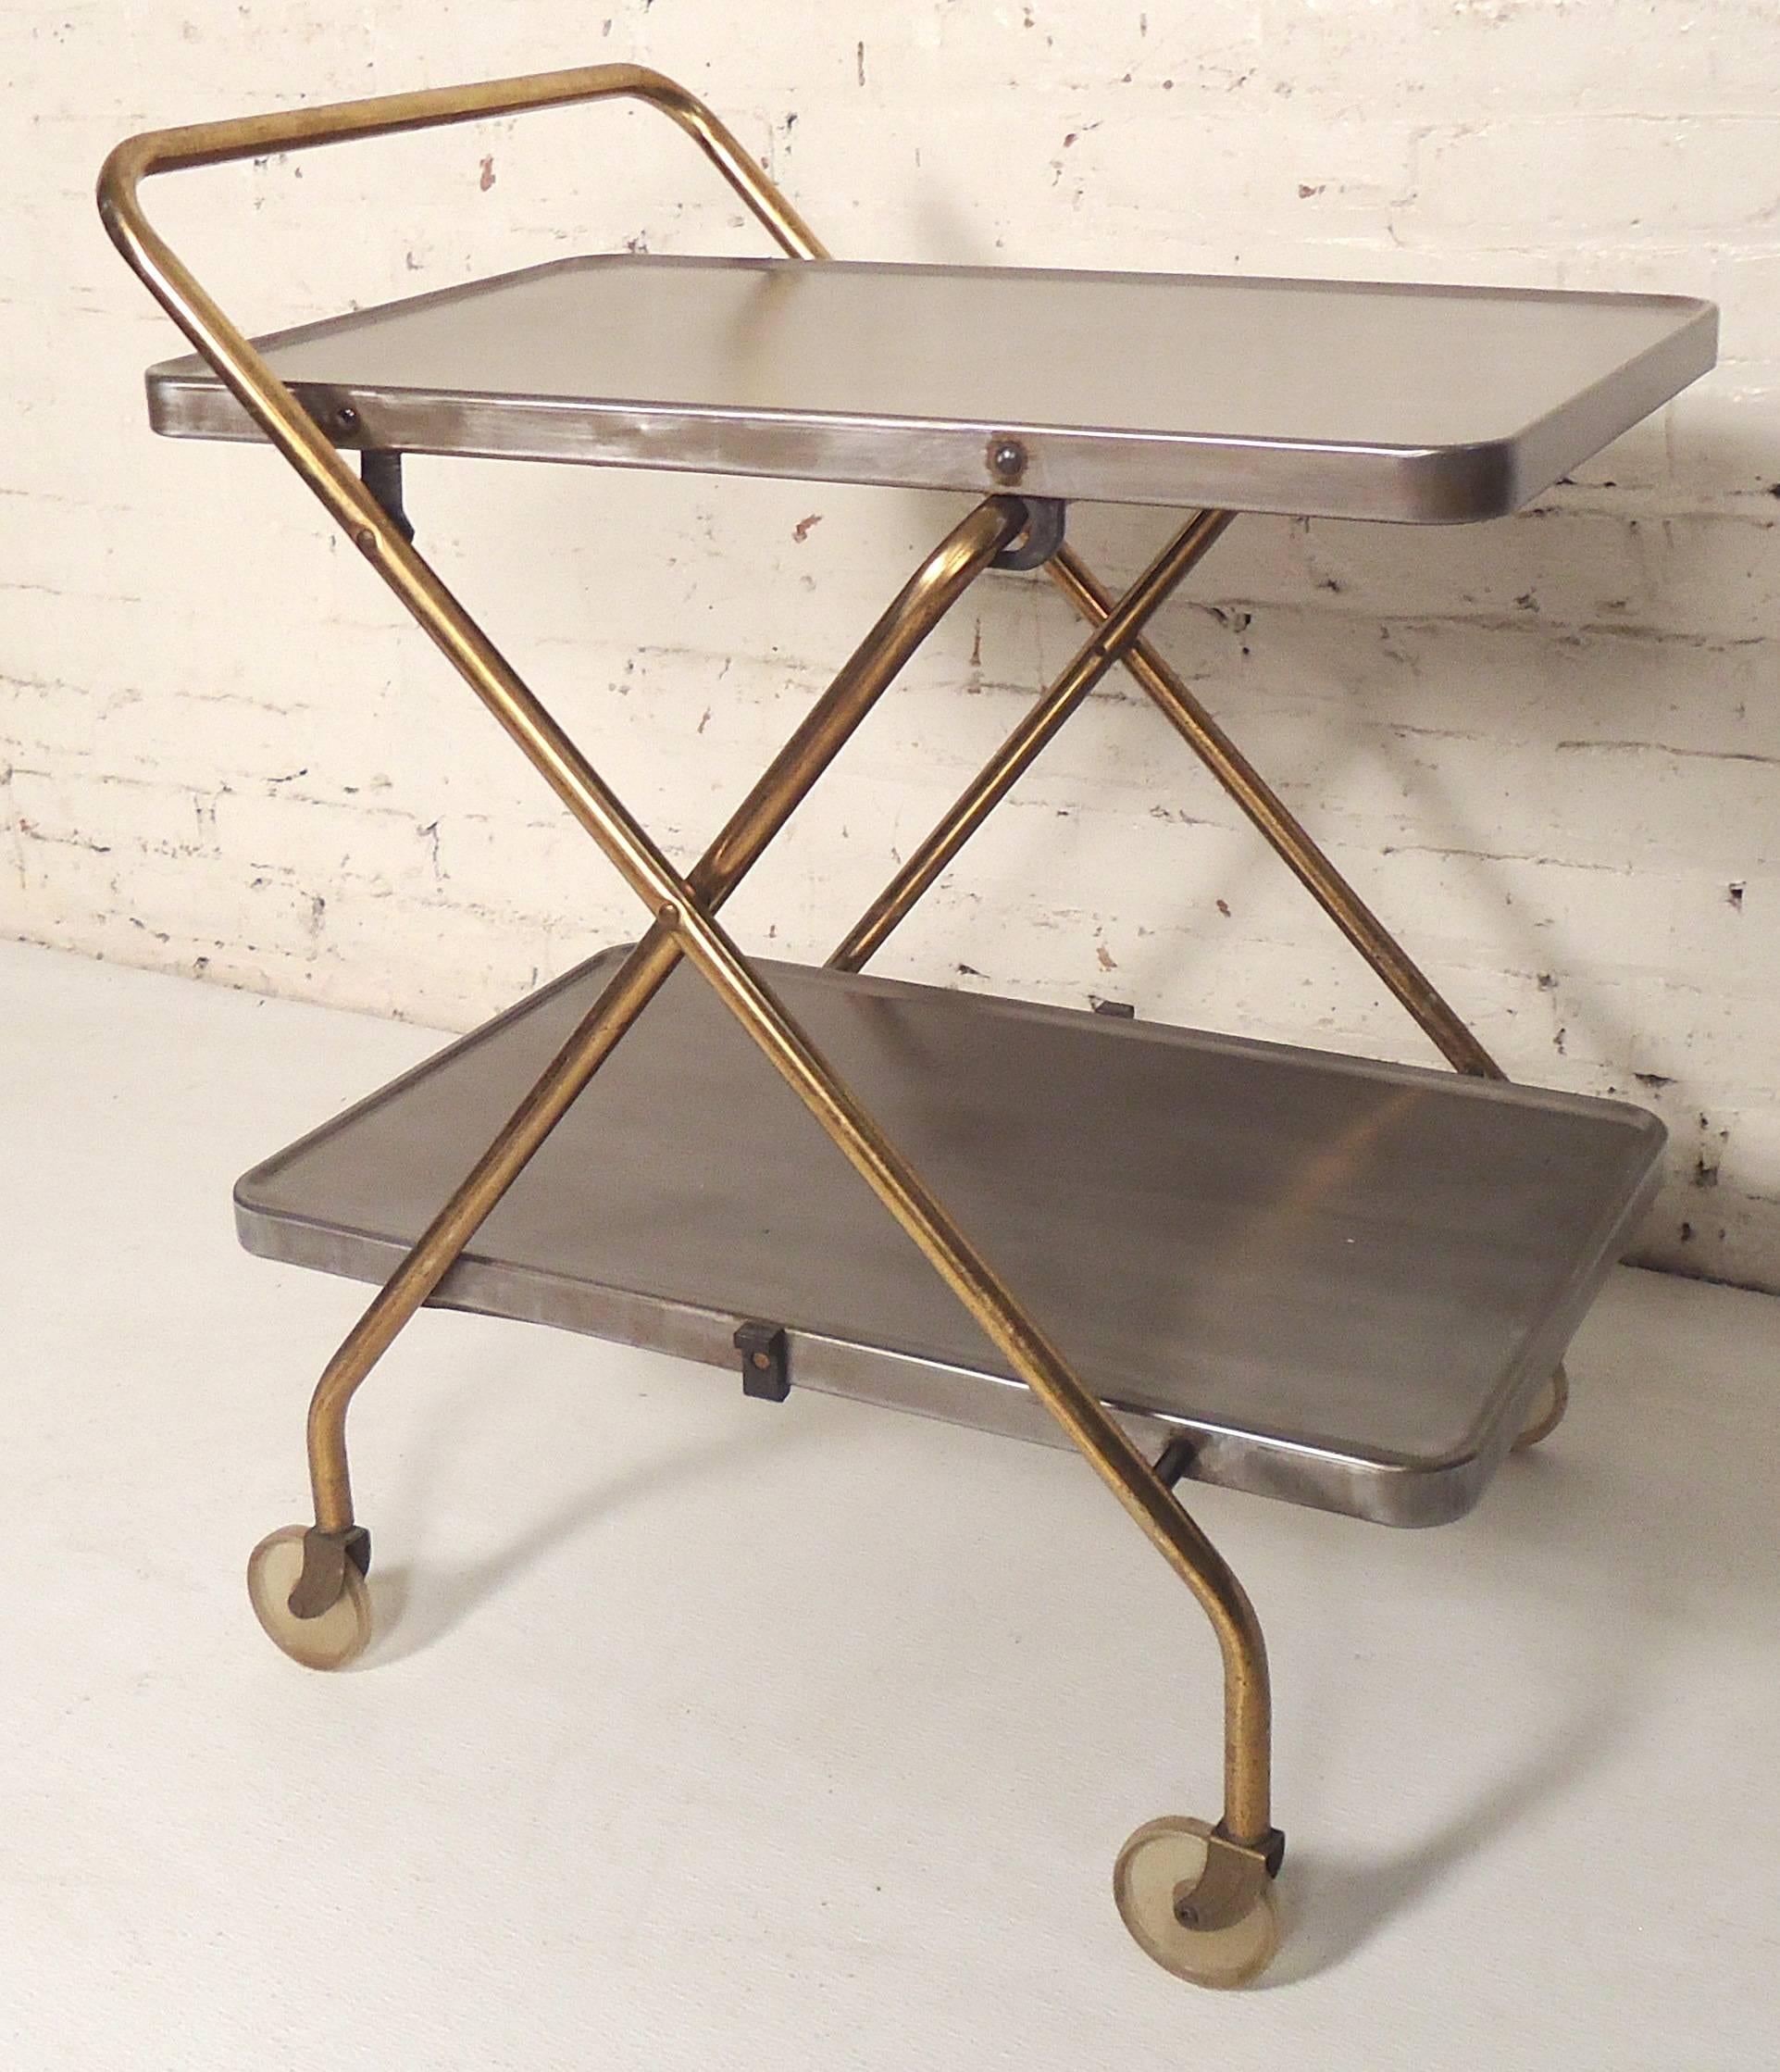 Vintage hospital cart has been restored to make a modern bar cart. Stripped metal trays with brass frame and large casters.

(Please confirm item location - NY or NJ - with dealer).
    